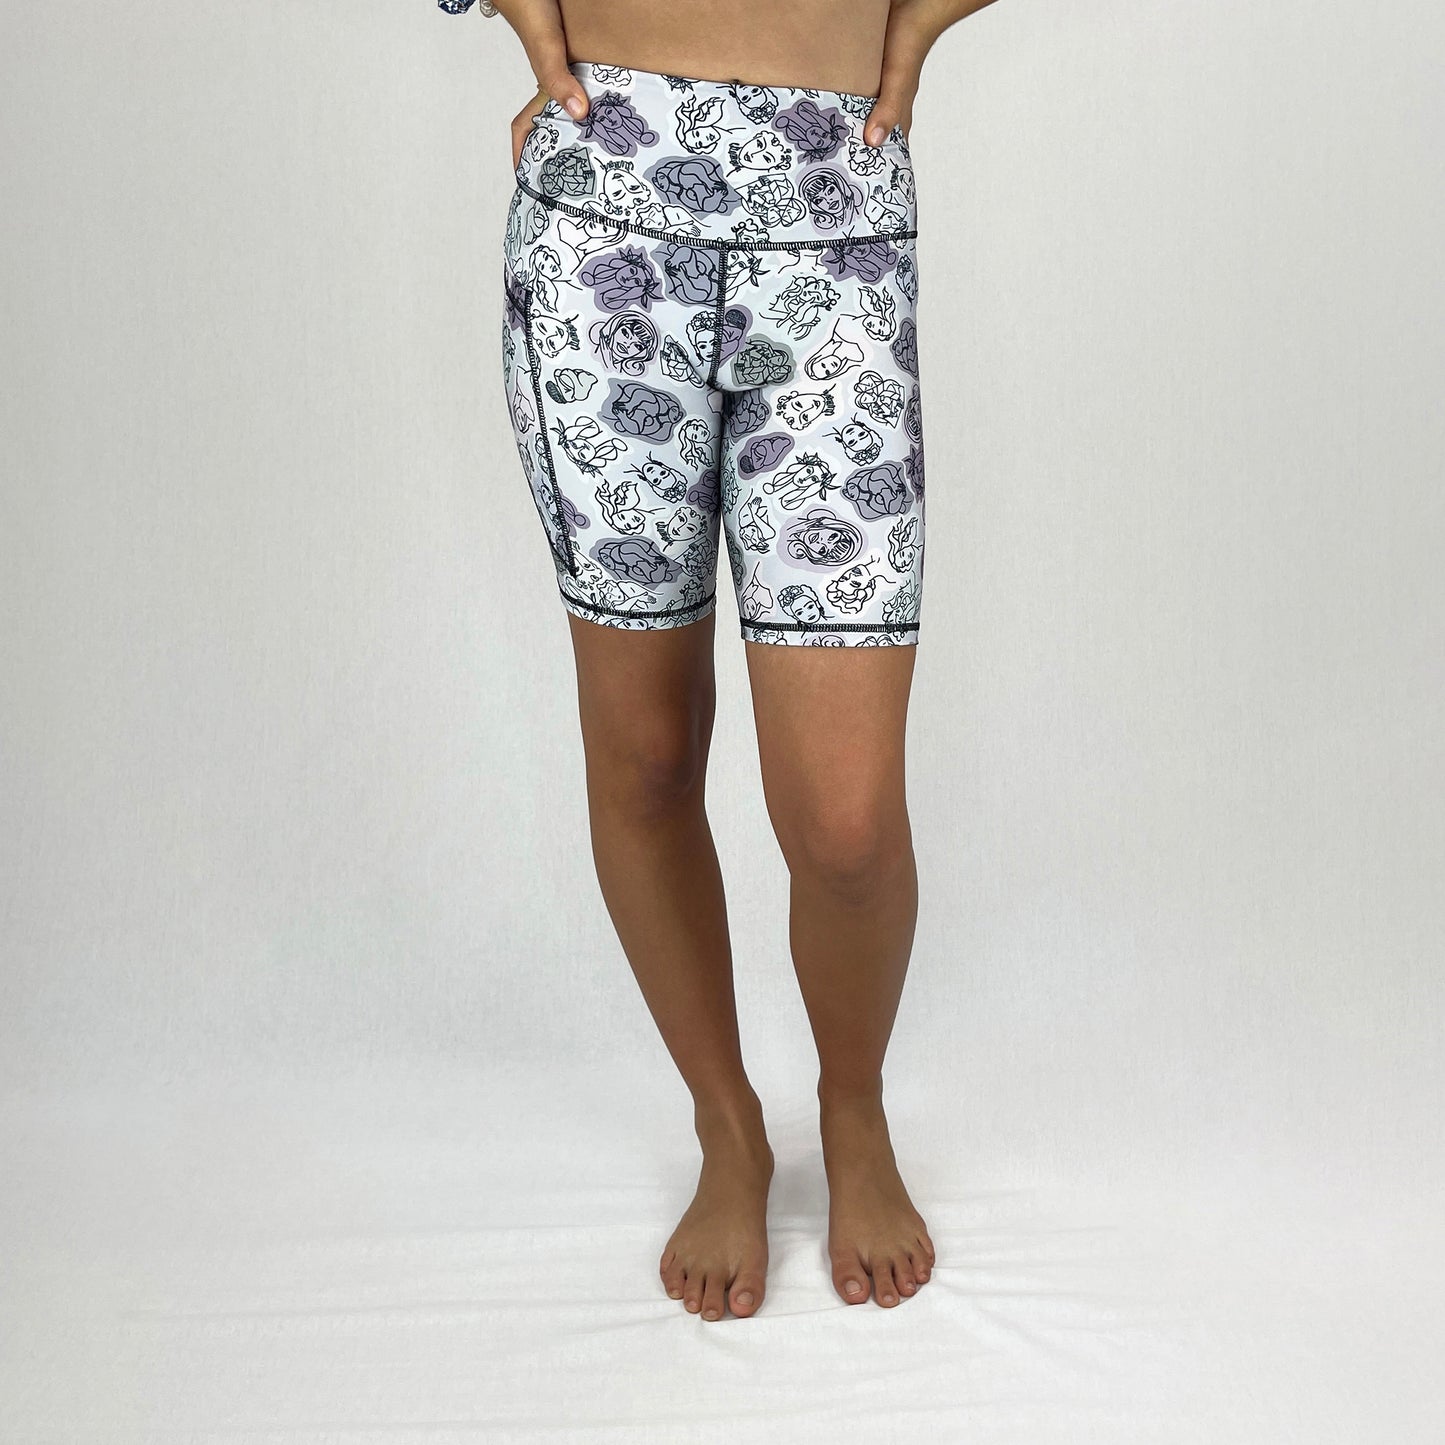 trendy bike shorts in recycled fabric made in Australia - Beauties front